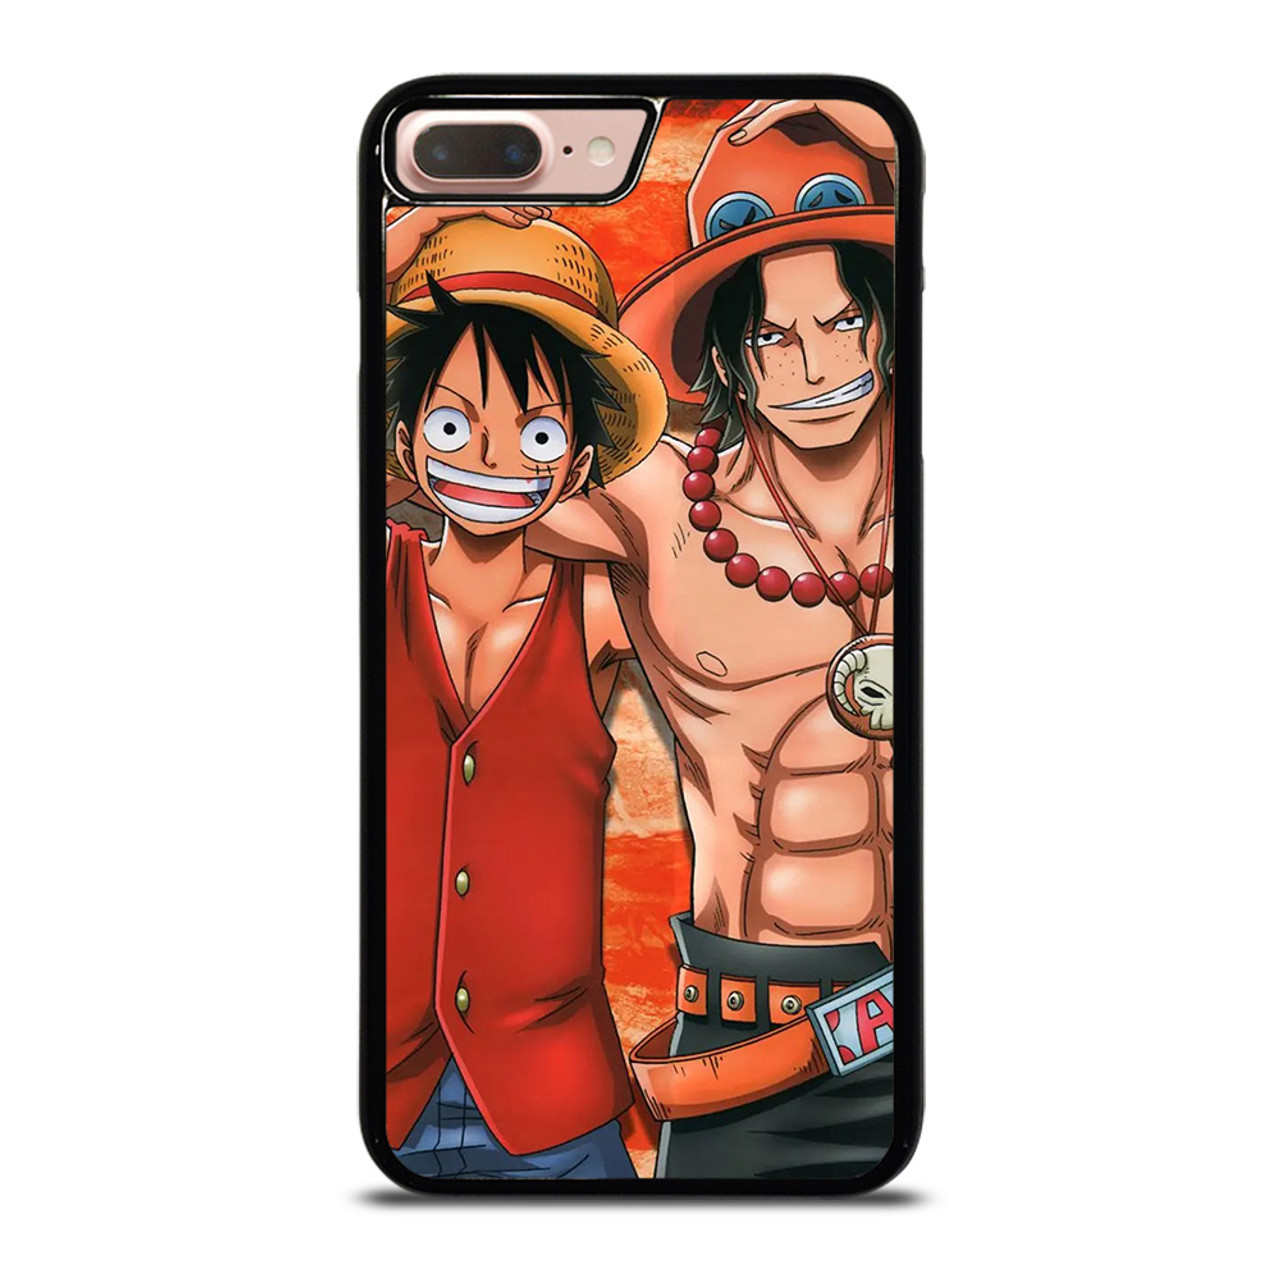 ONE PIECE ACE AND LUFFY iPhone 8 Plus Case Cover